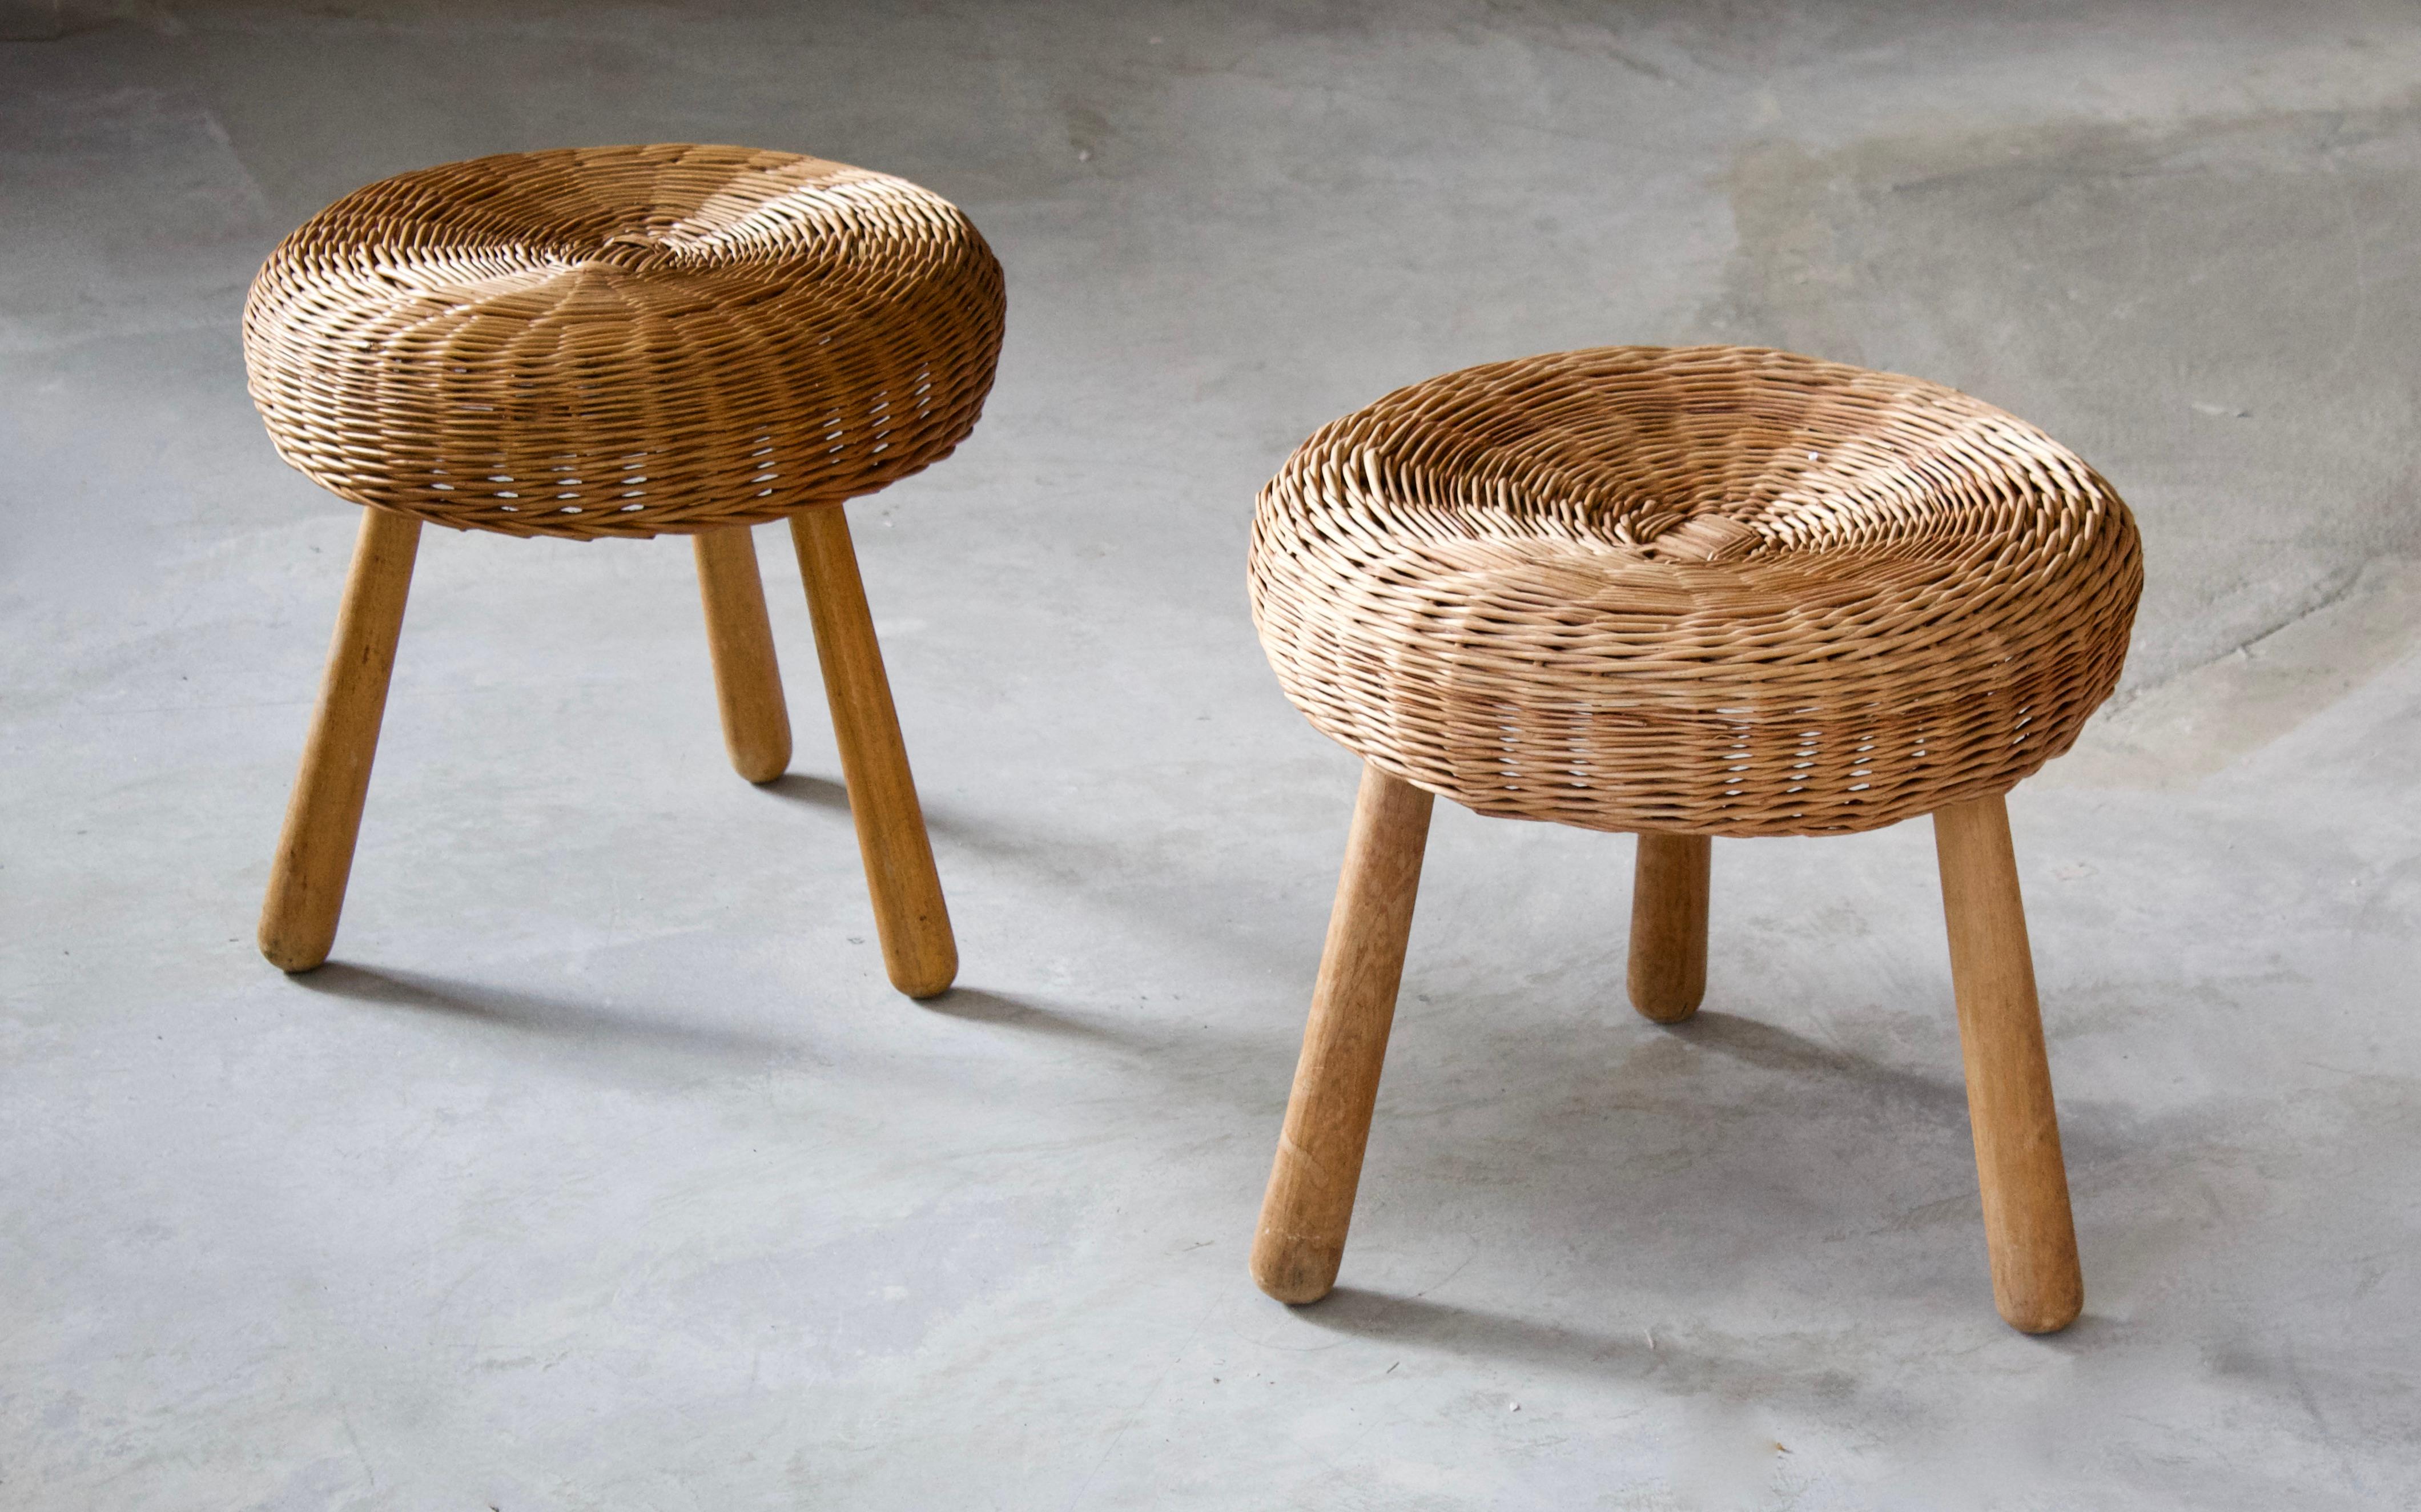 A pair of stools, design attributed to Tony Paul. Features an interesting mix of rattan and finely carved solid wood.

Other designers of Minimalist stools of the period include Charlotte Perriand, Pierre Chapo, Isamu Noguchi, Eero Arnio, and Sori